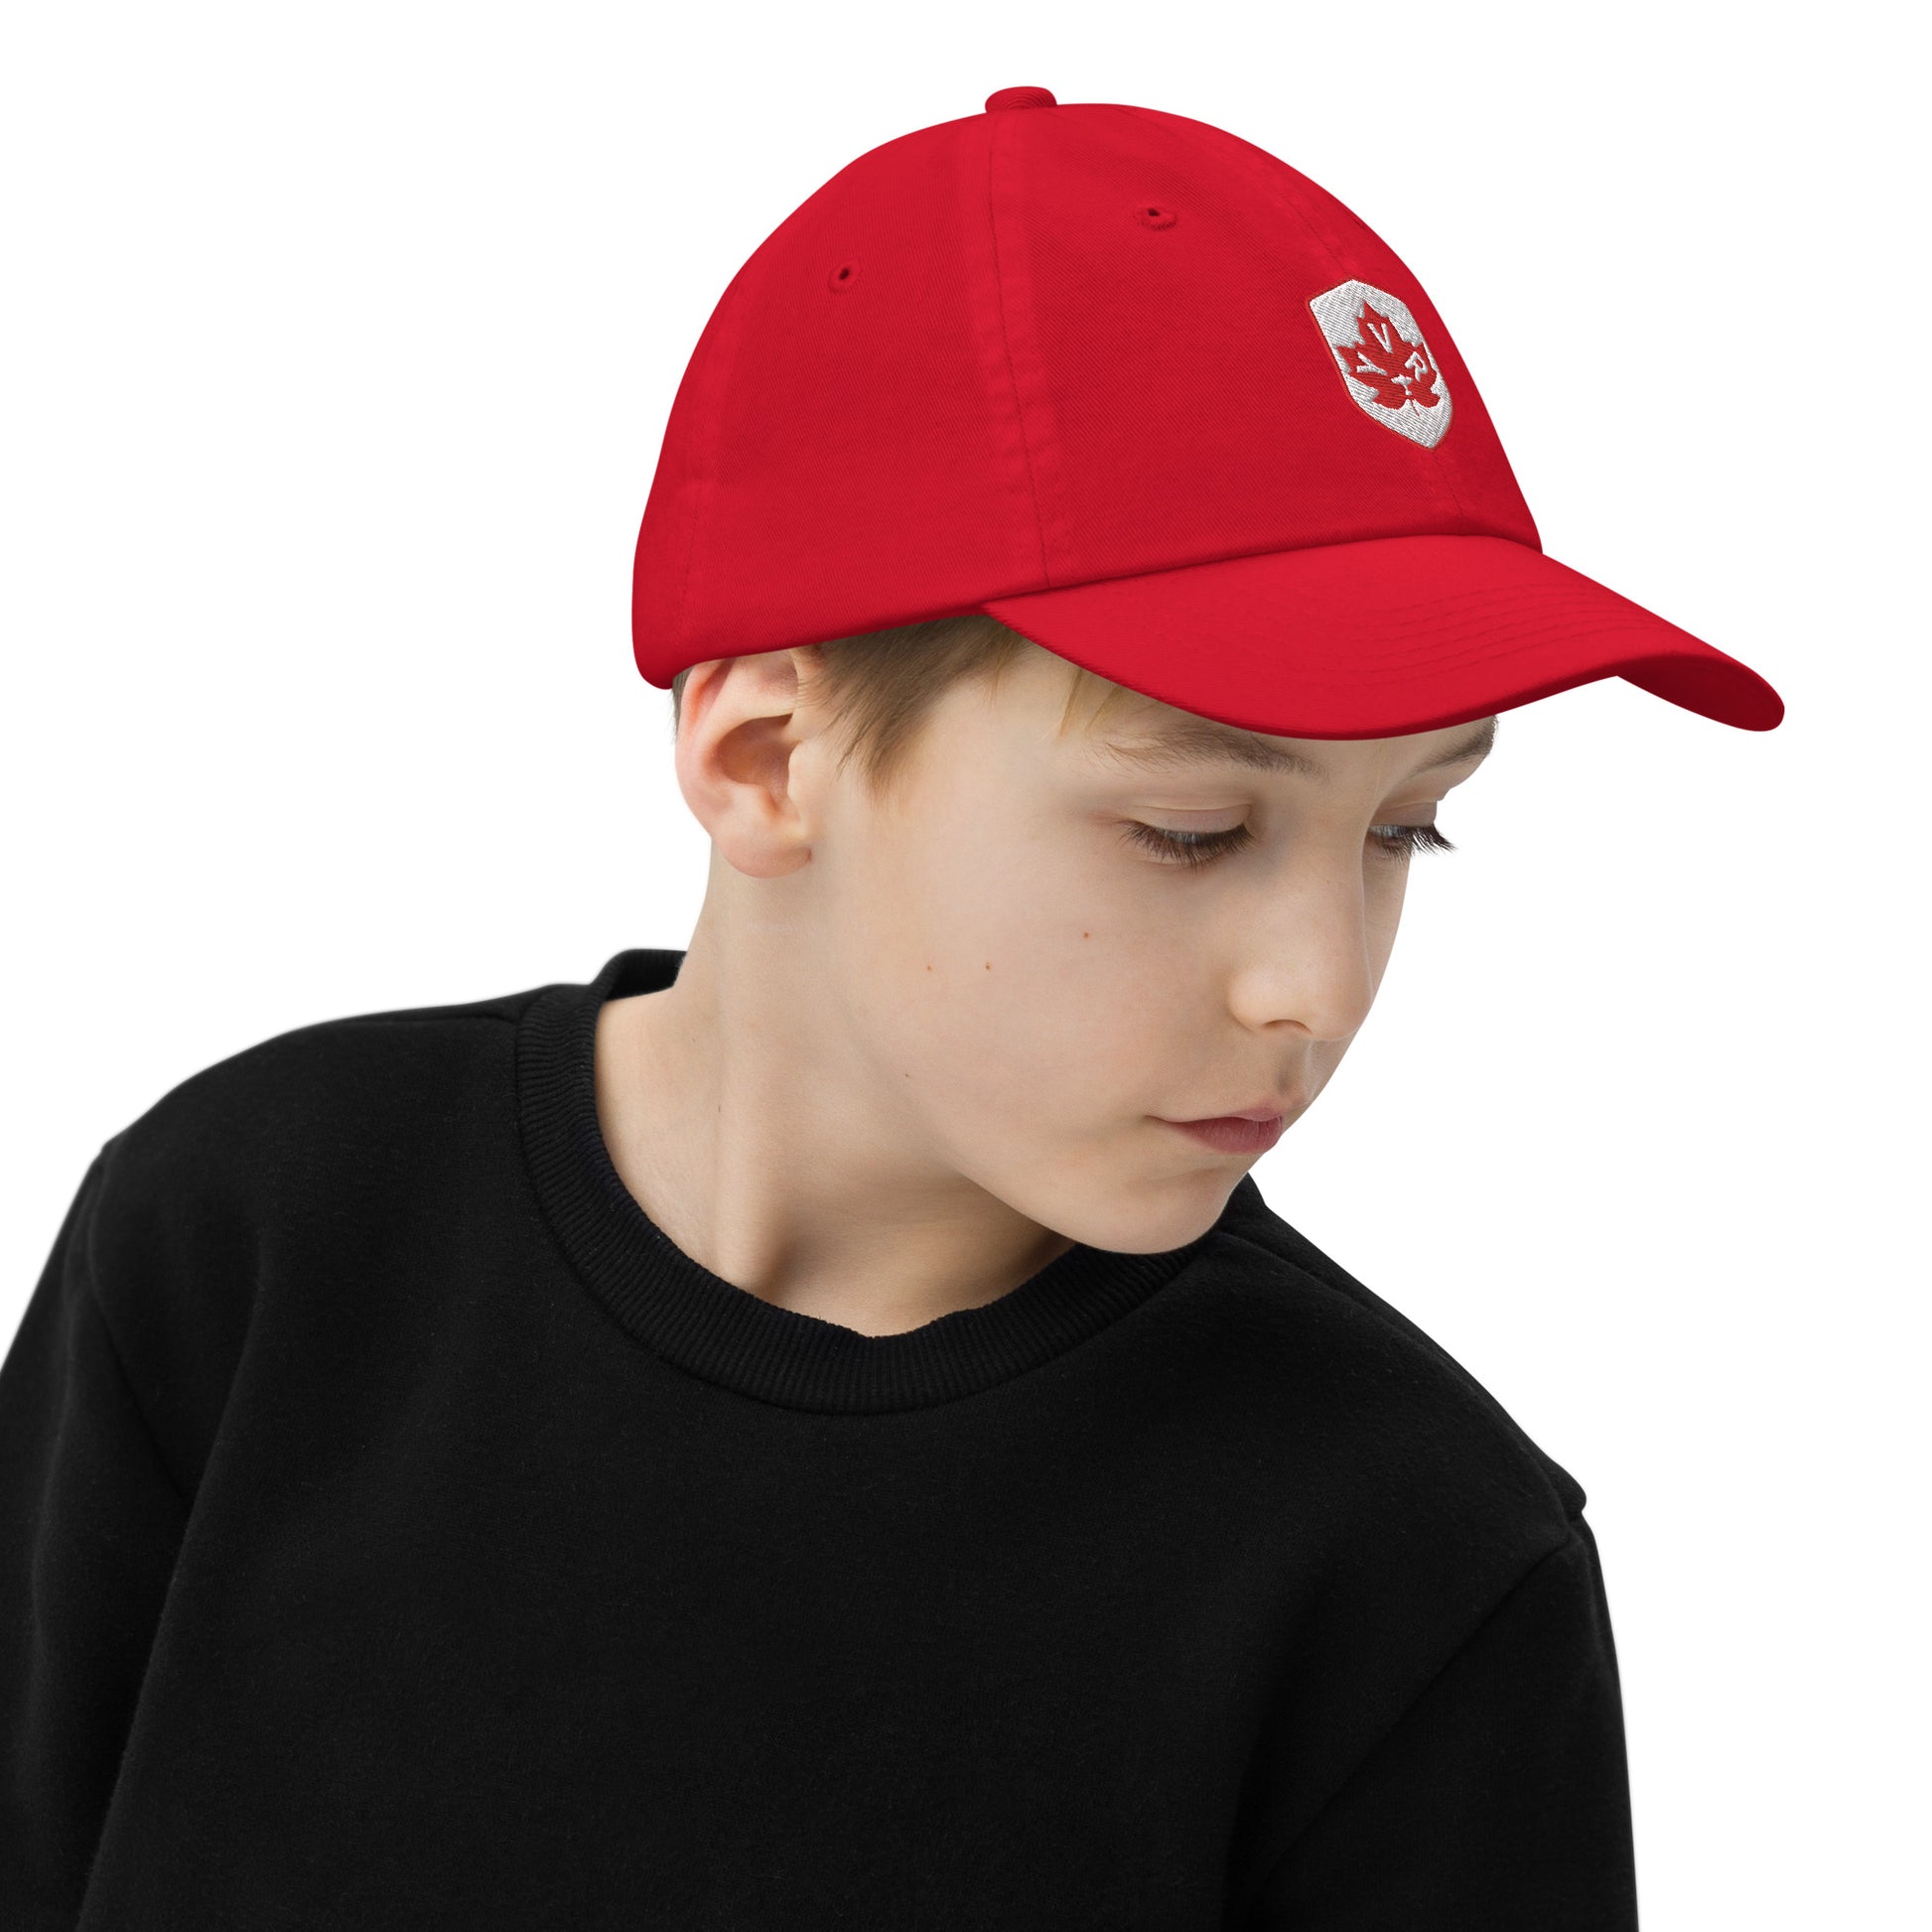 Maple Leaf Kid's Cap - Red/White • YVR Vancouver • YHM Designs - Image 08